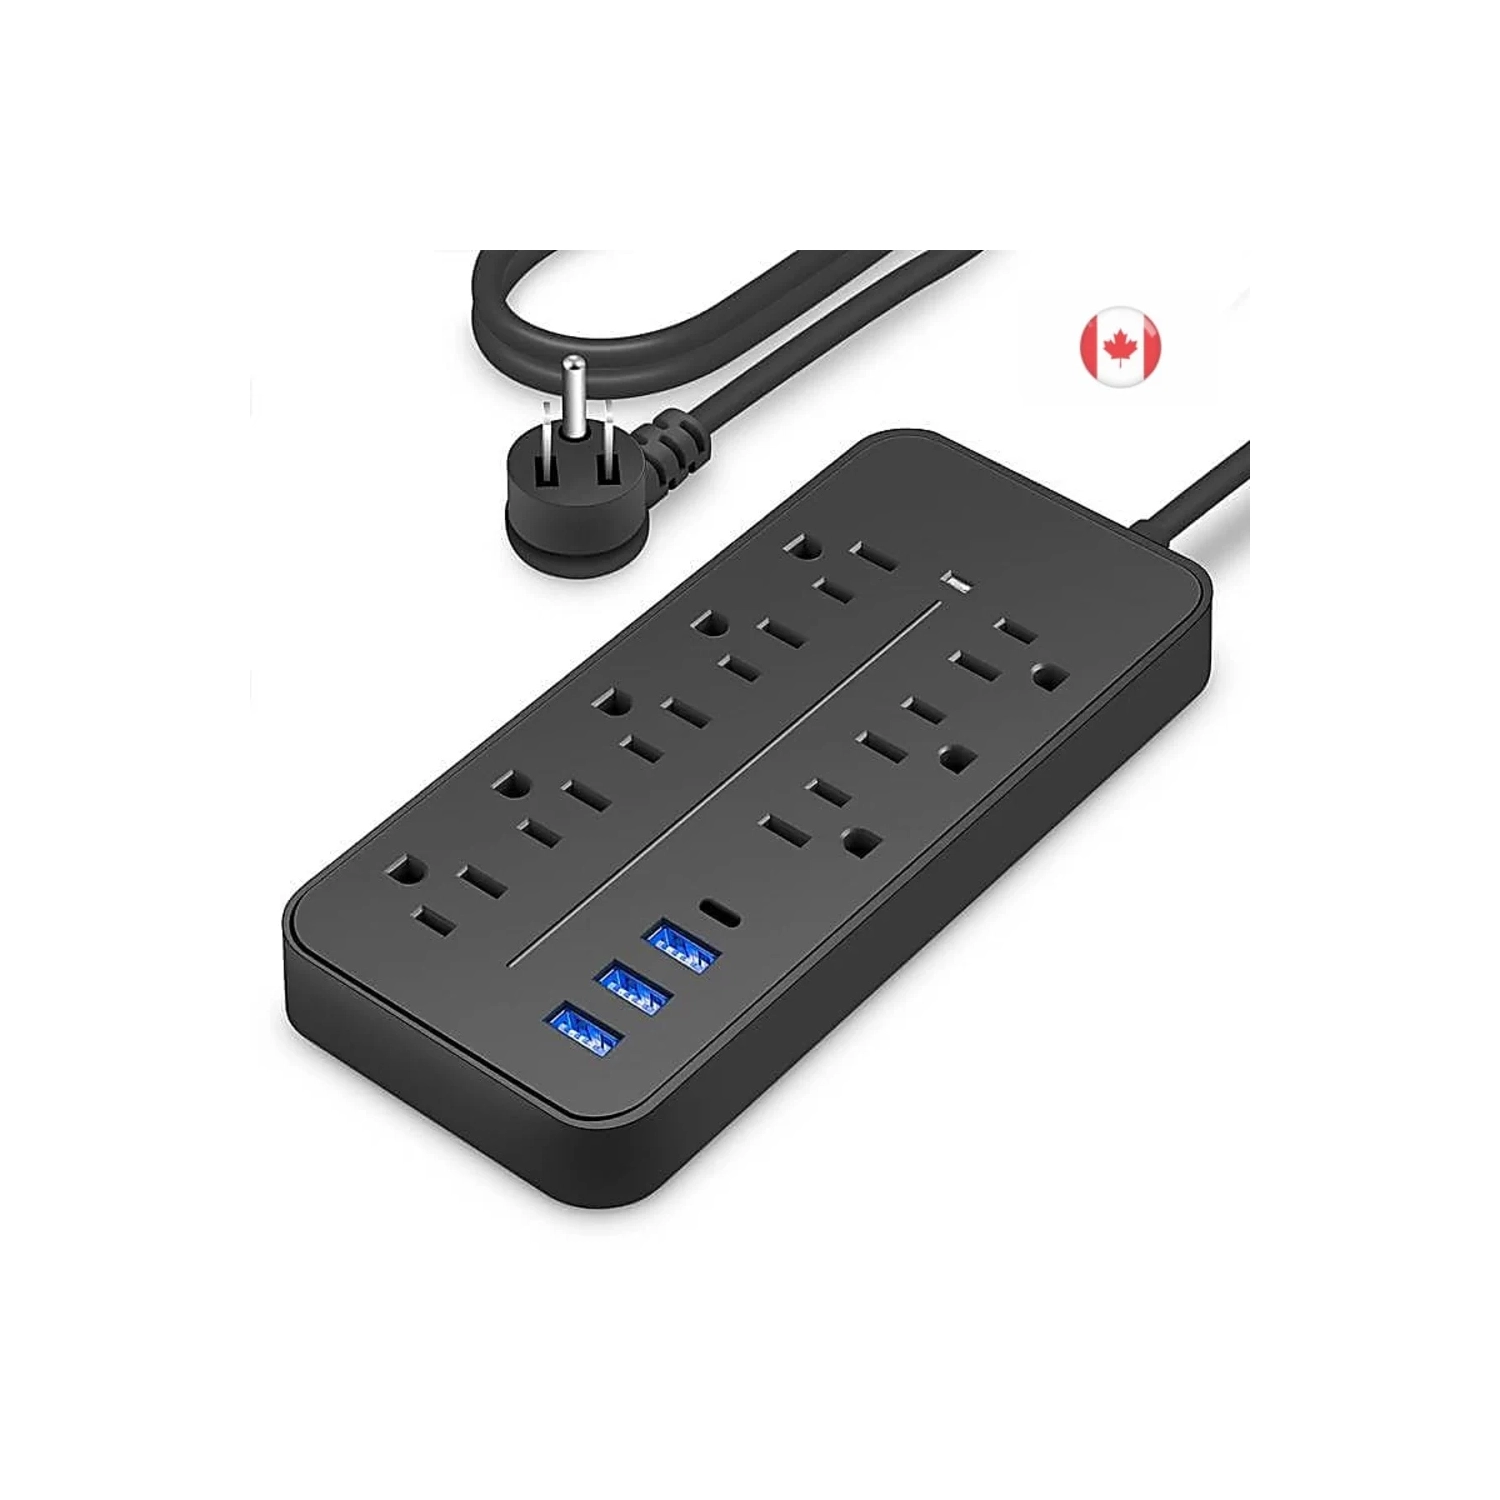 8 AC Outlets Surge Protector power bar 3 USB A & 1 USB C Ports, 4ft Extension Cord - Power Strip & in Sleek Black for Home, Office, Kitchen, Garage & Dorms